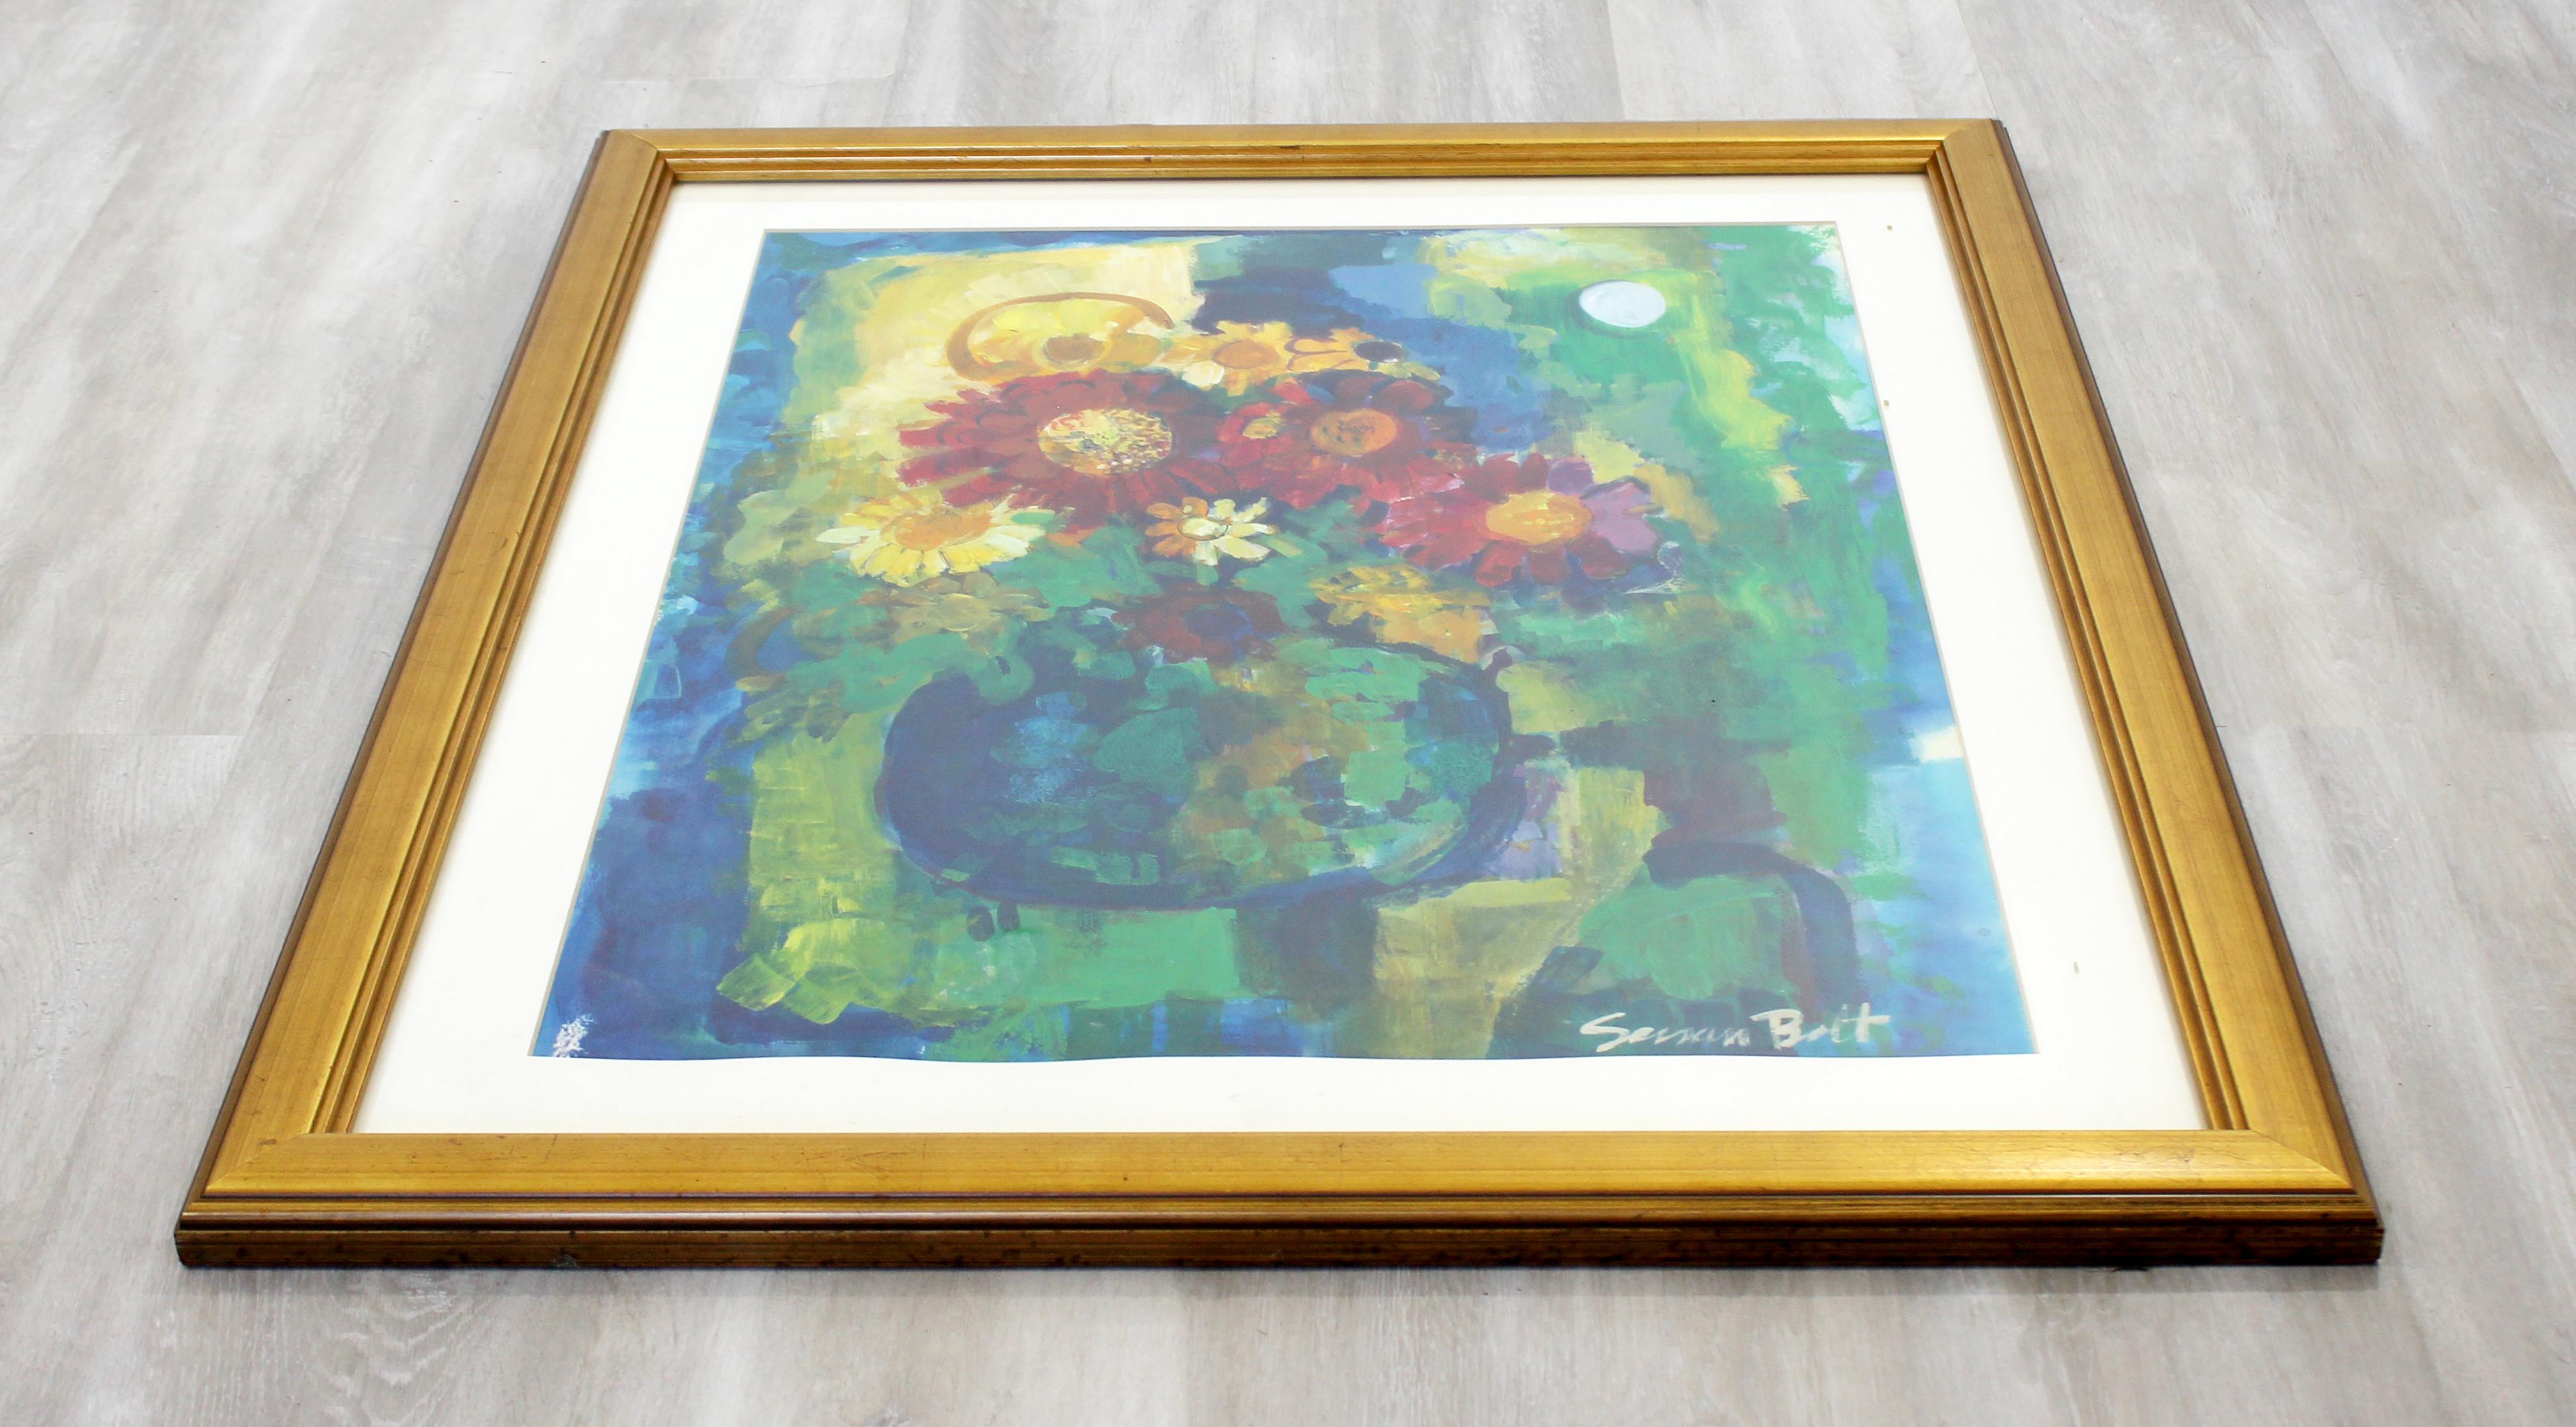 20th Century Contemporary Modern Framed Acrylic Floral Painting Signed Susan Bolt Still Life